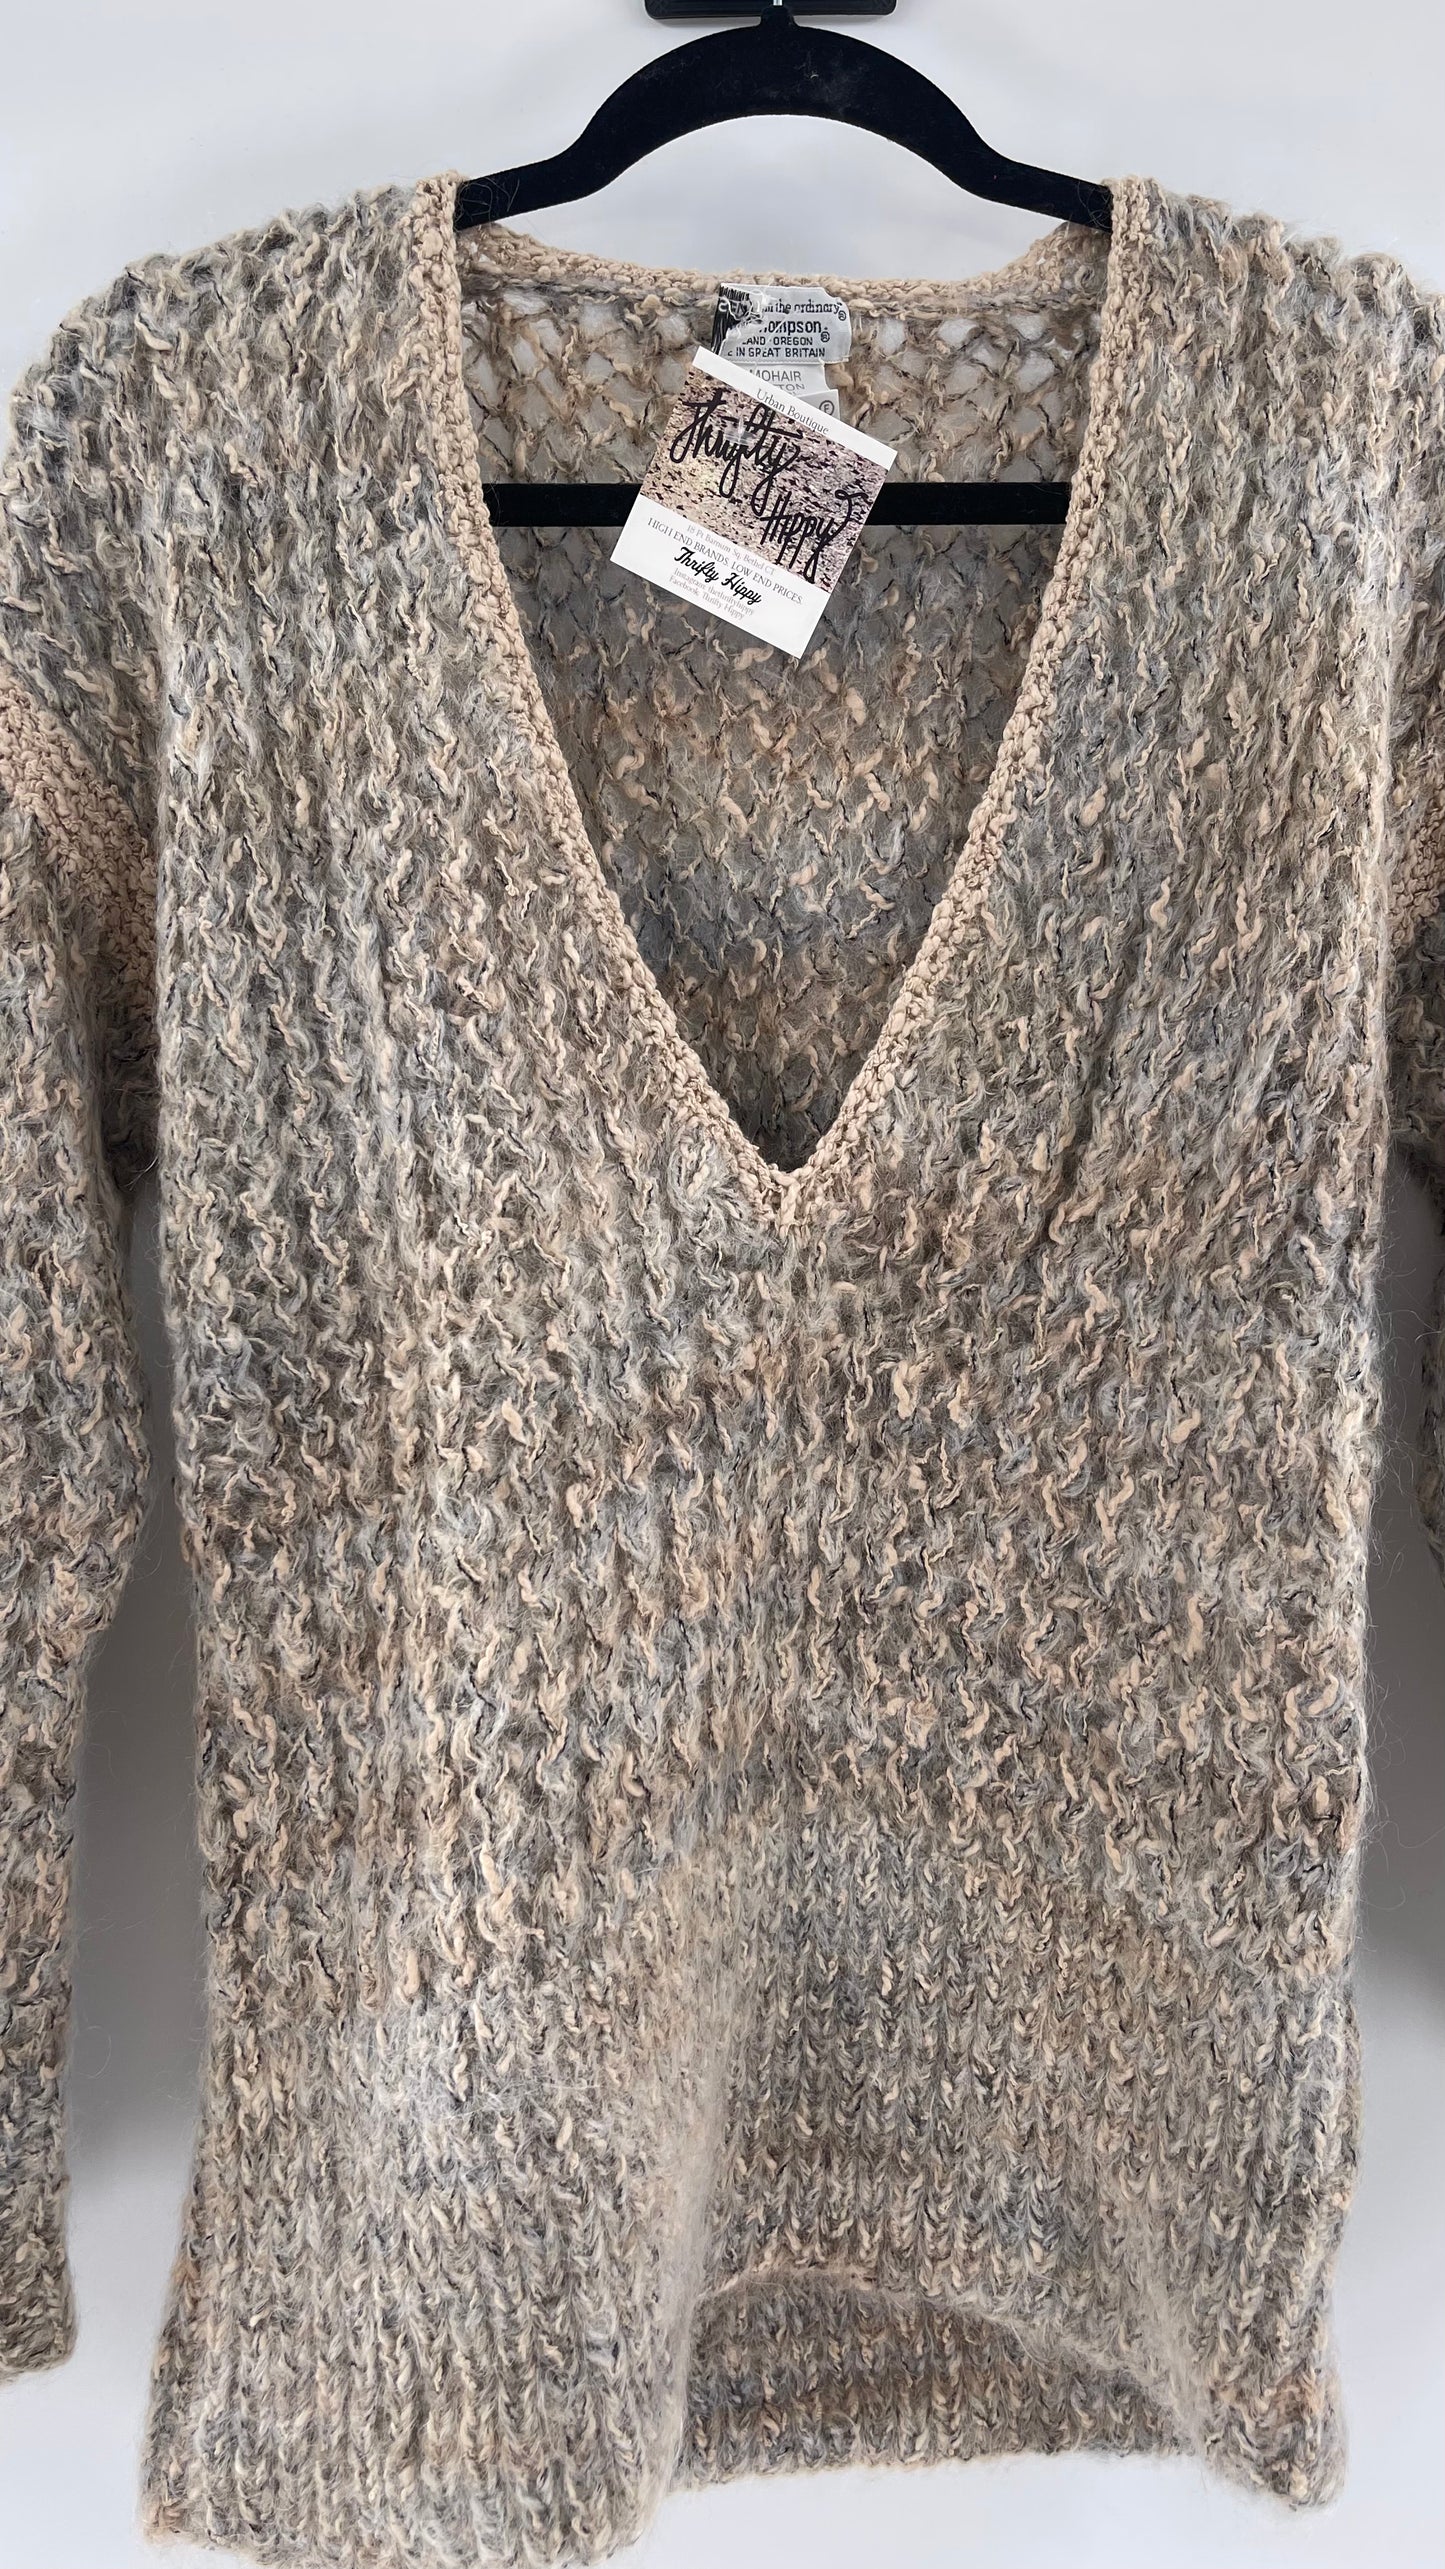 Urban Renewal 75% Mohair Netted Sweater (S/M)